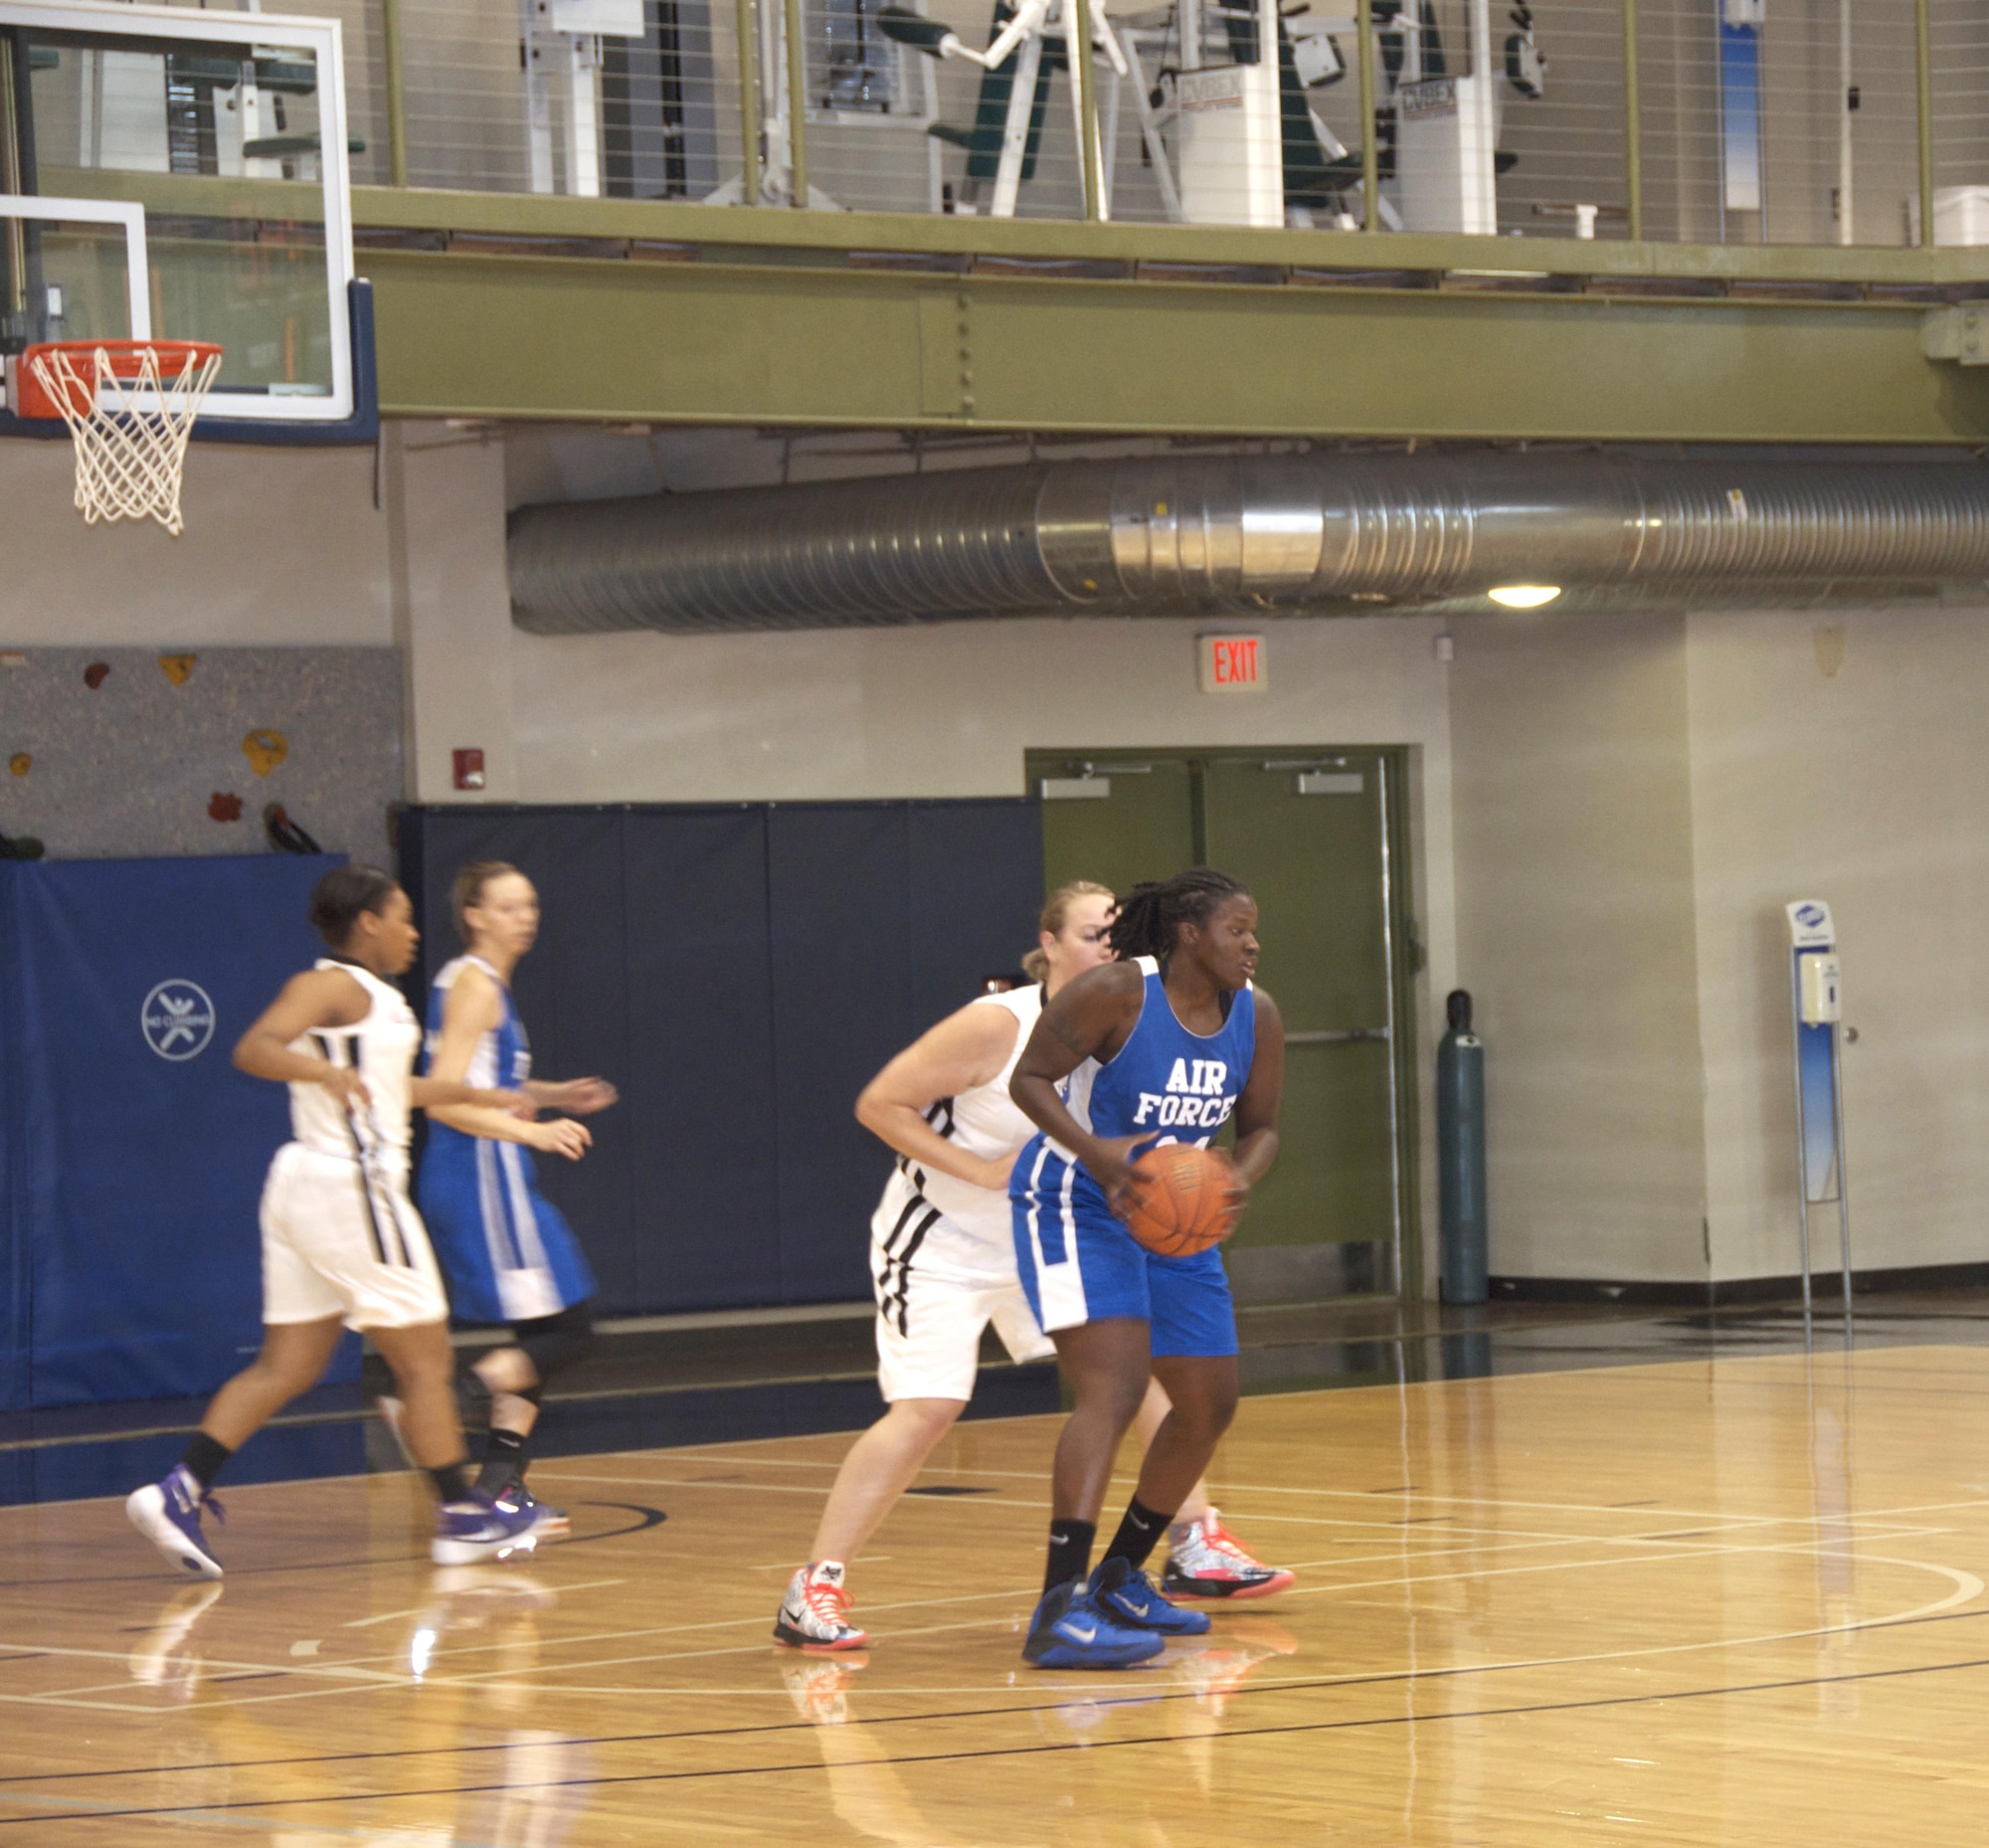 Staff Sgt. Charmaine Clark averaged 16 points per game to lead the All-Air Force women's basketball team to a third-place finish in the Armed Forces Tournament. (U.S. Air Force photo/Steve Warns)